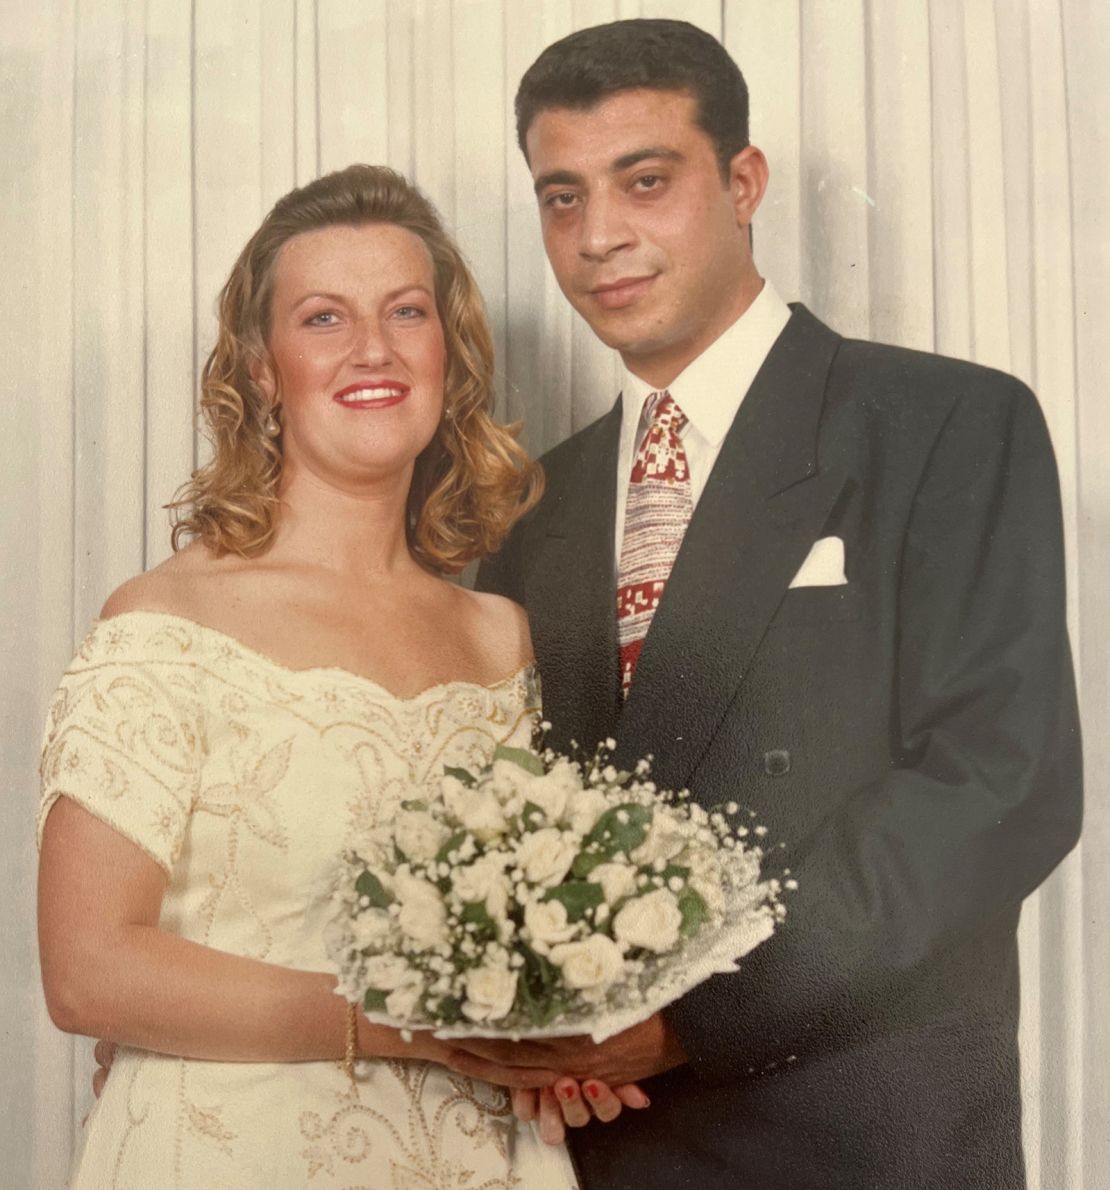 Here's Christina and Wahid on their wedding day in 1997.